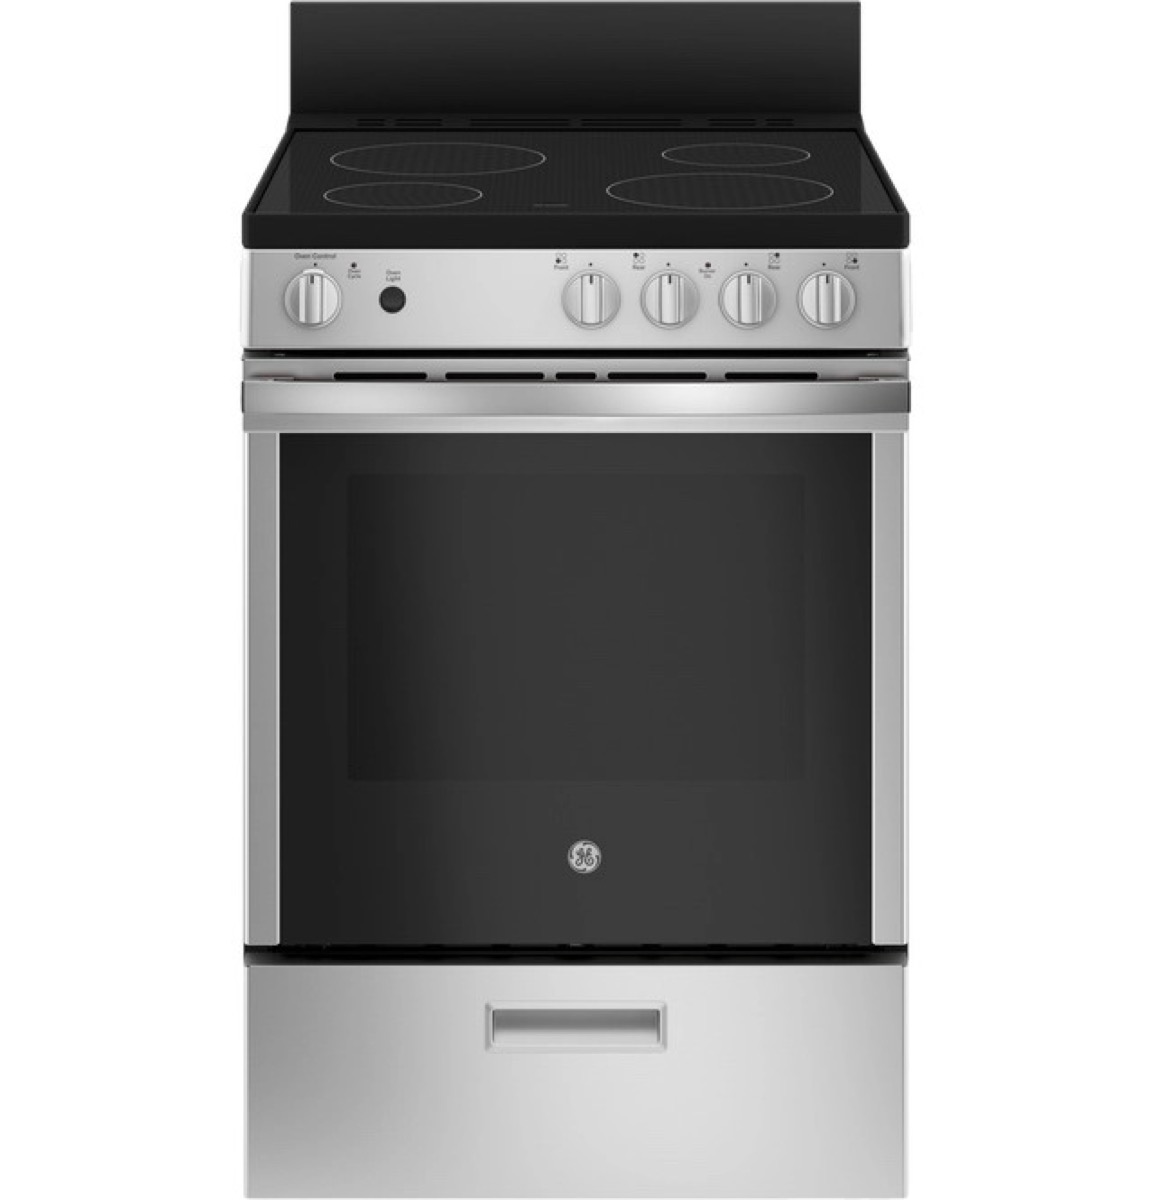 a recalled ge stove in chrome finish